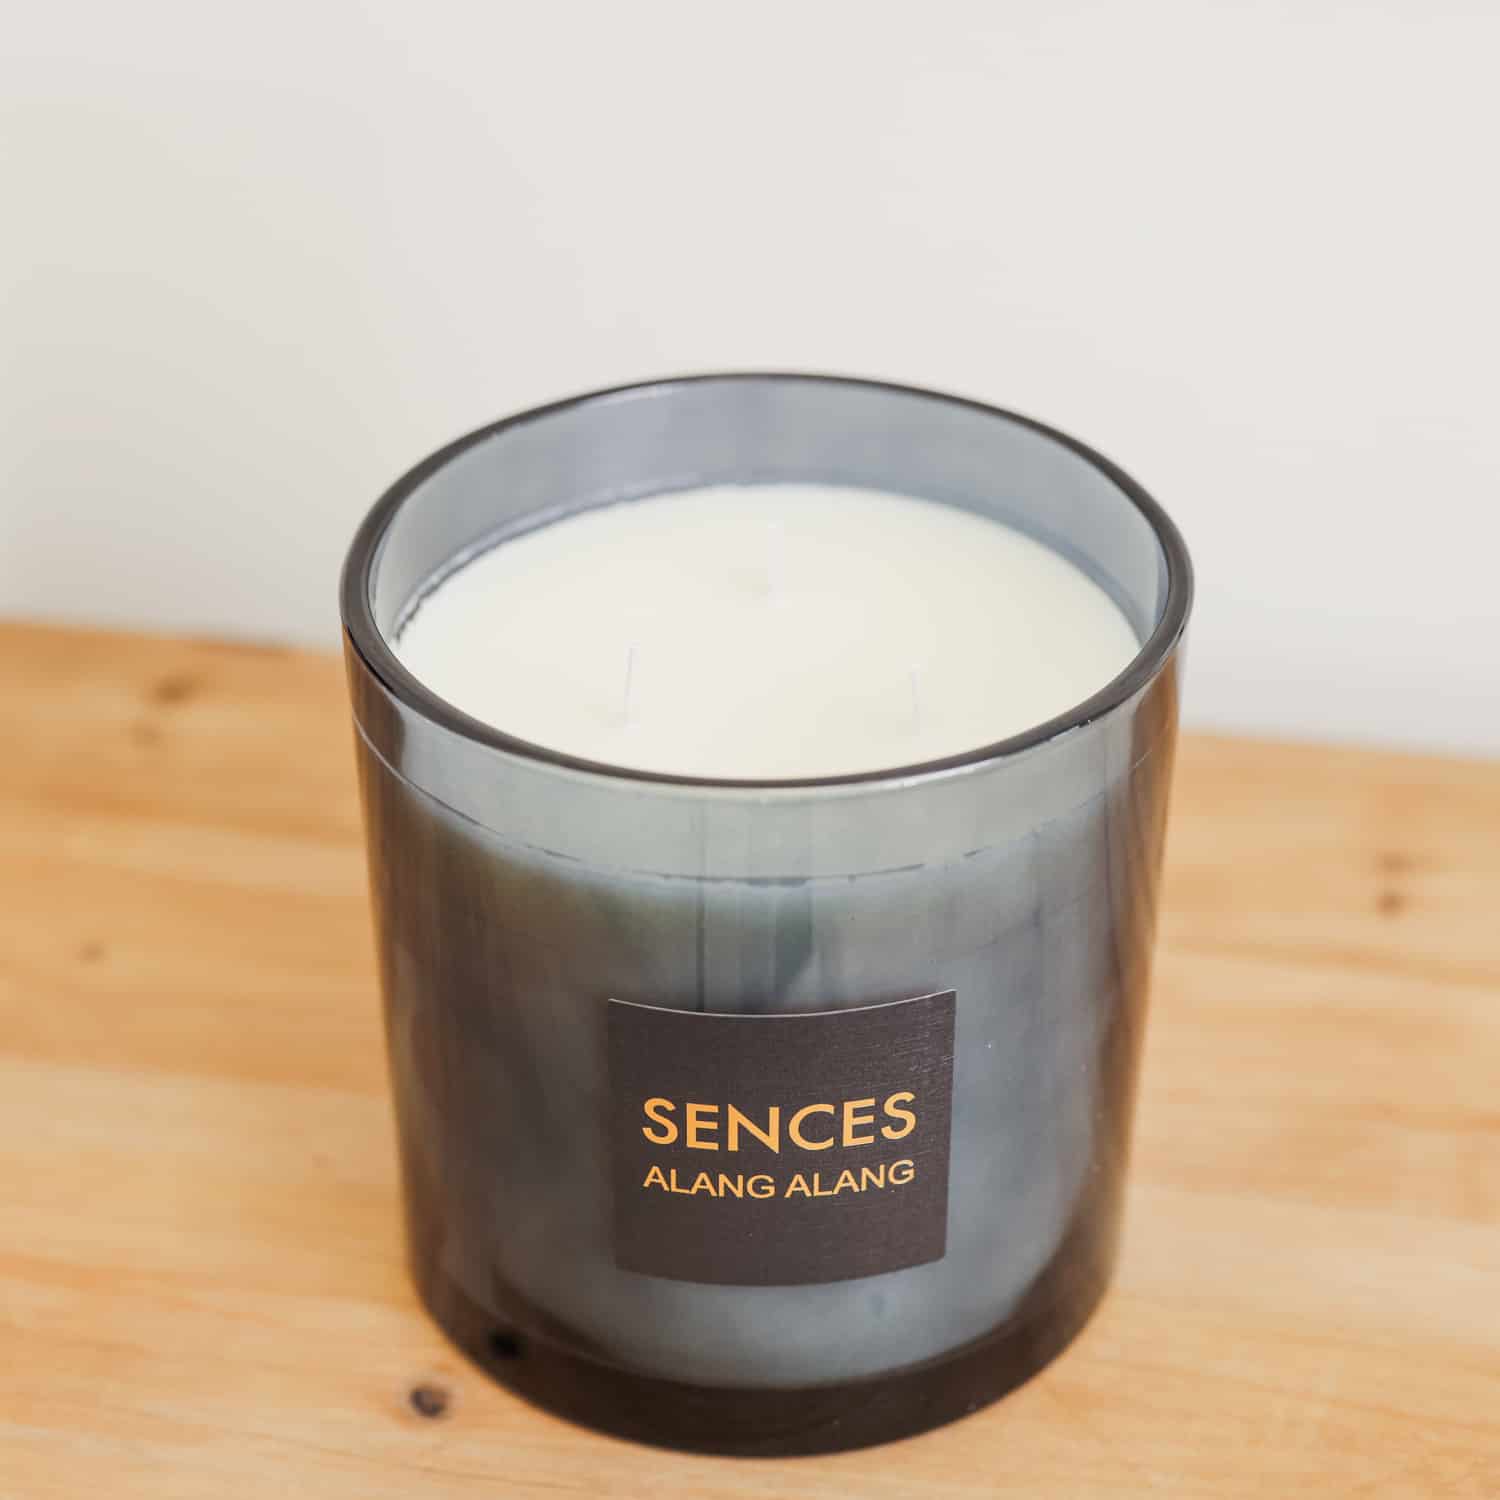 Sences Alang Alang Onyx Candle from above showing wicks.